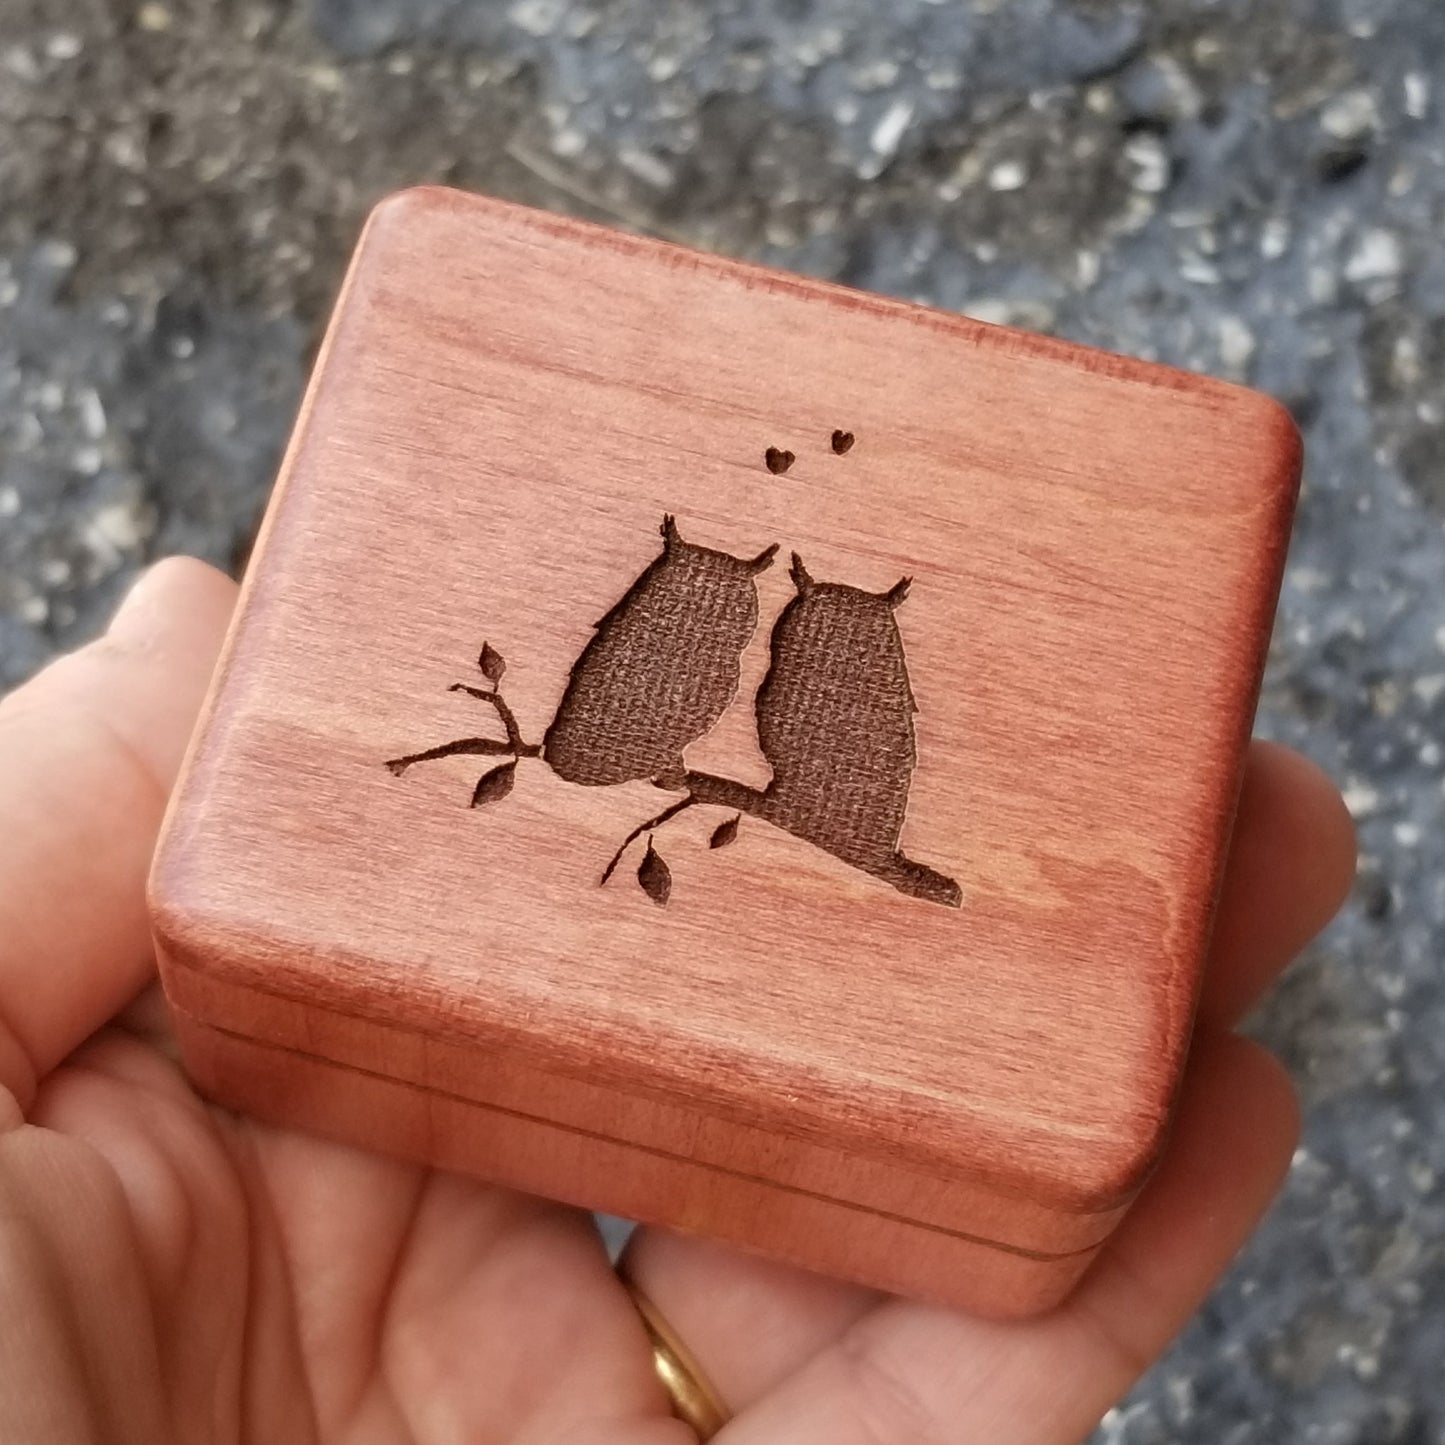 proposal box with owls engraved on top